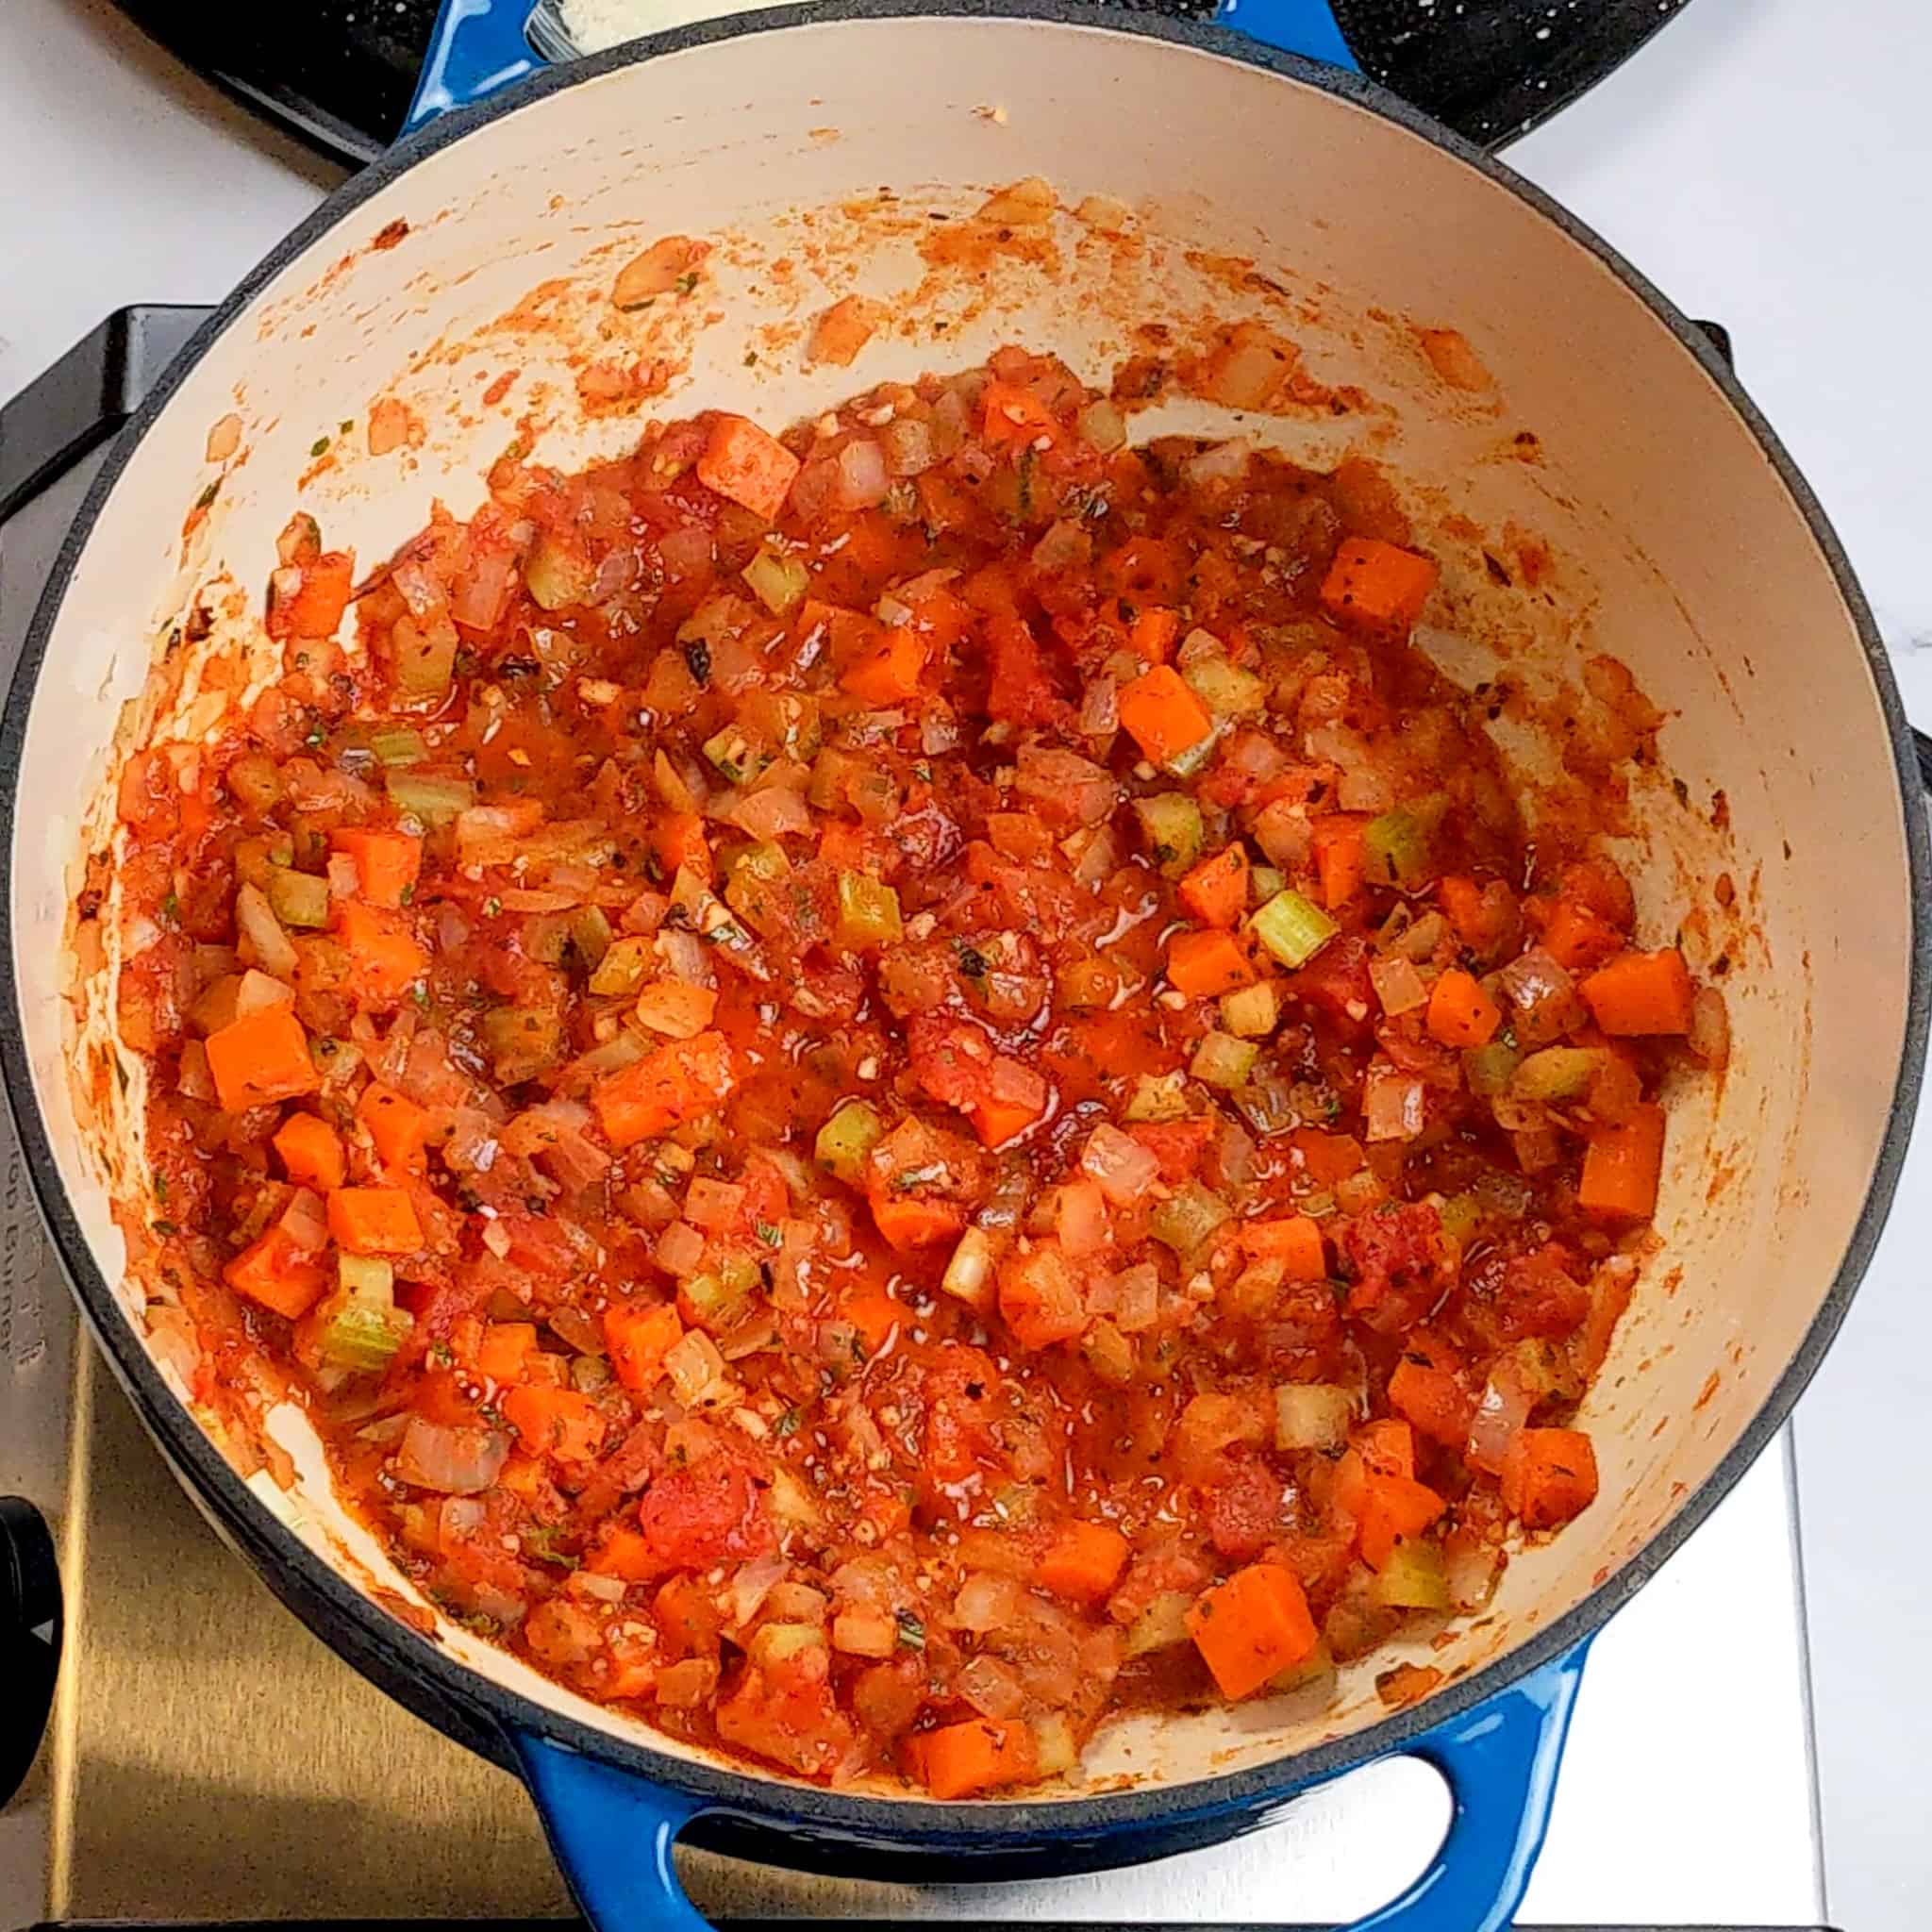 diced mirepoix combined with crushed fire-roasted tomatoes and crushed calabrian peppers in a dutch oven